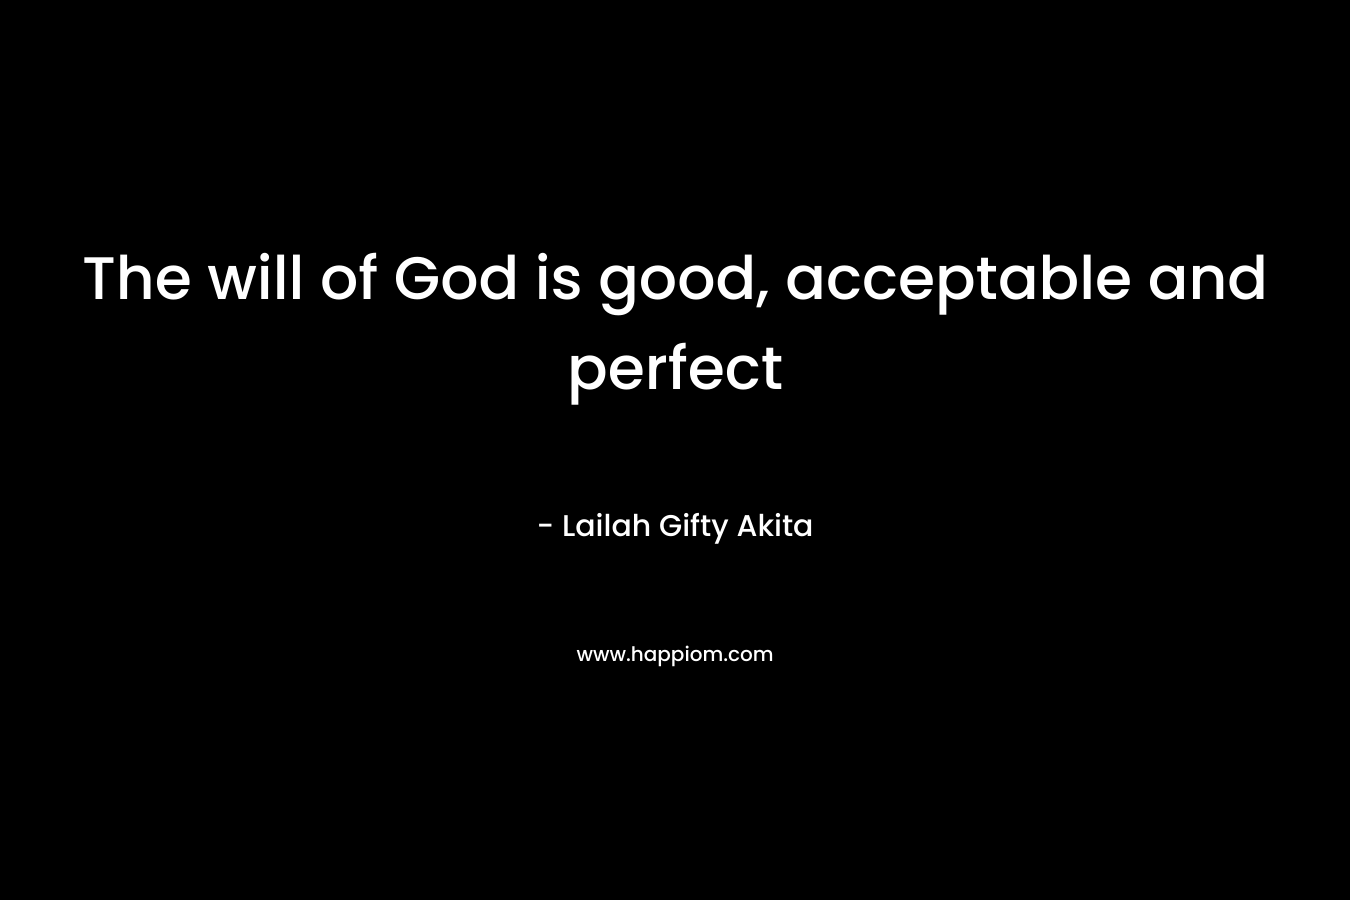 The will of God is good, acceptable and perfect